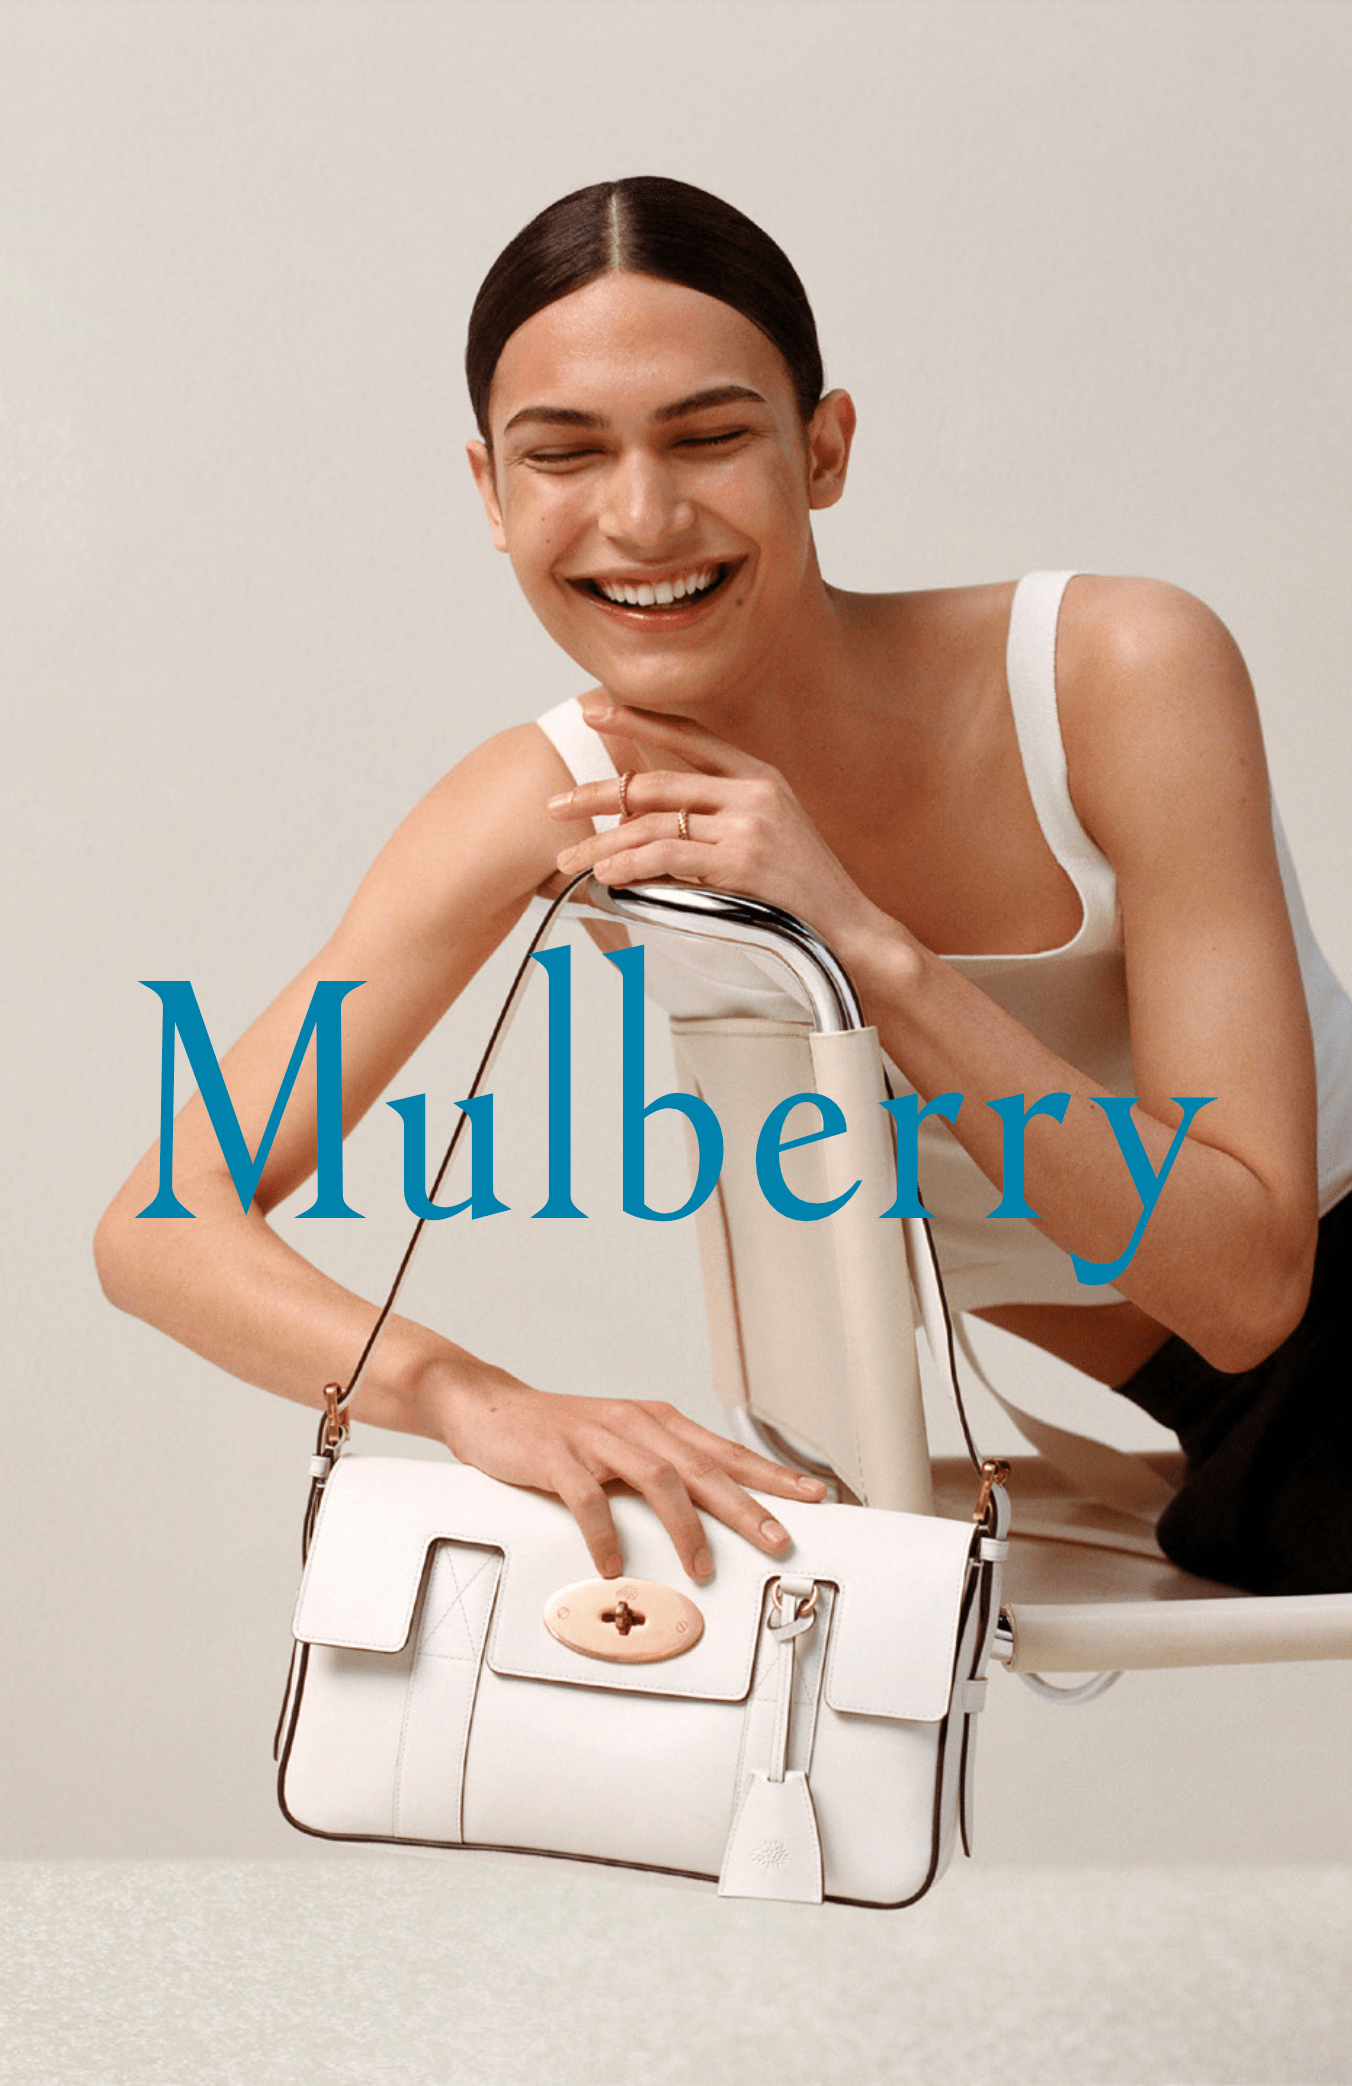 Mulberry 'Bayswater' Spring 2023 Ad Campaign Review | The Impression